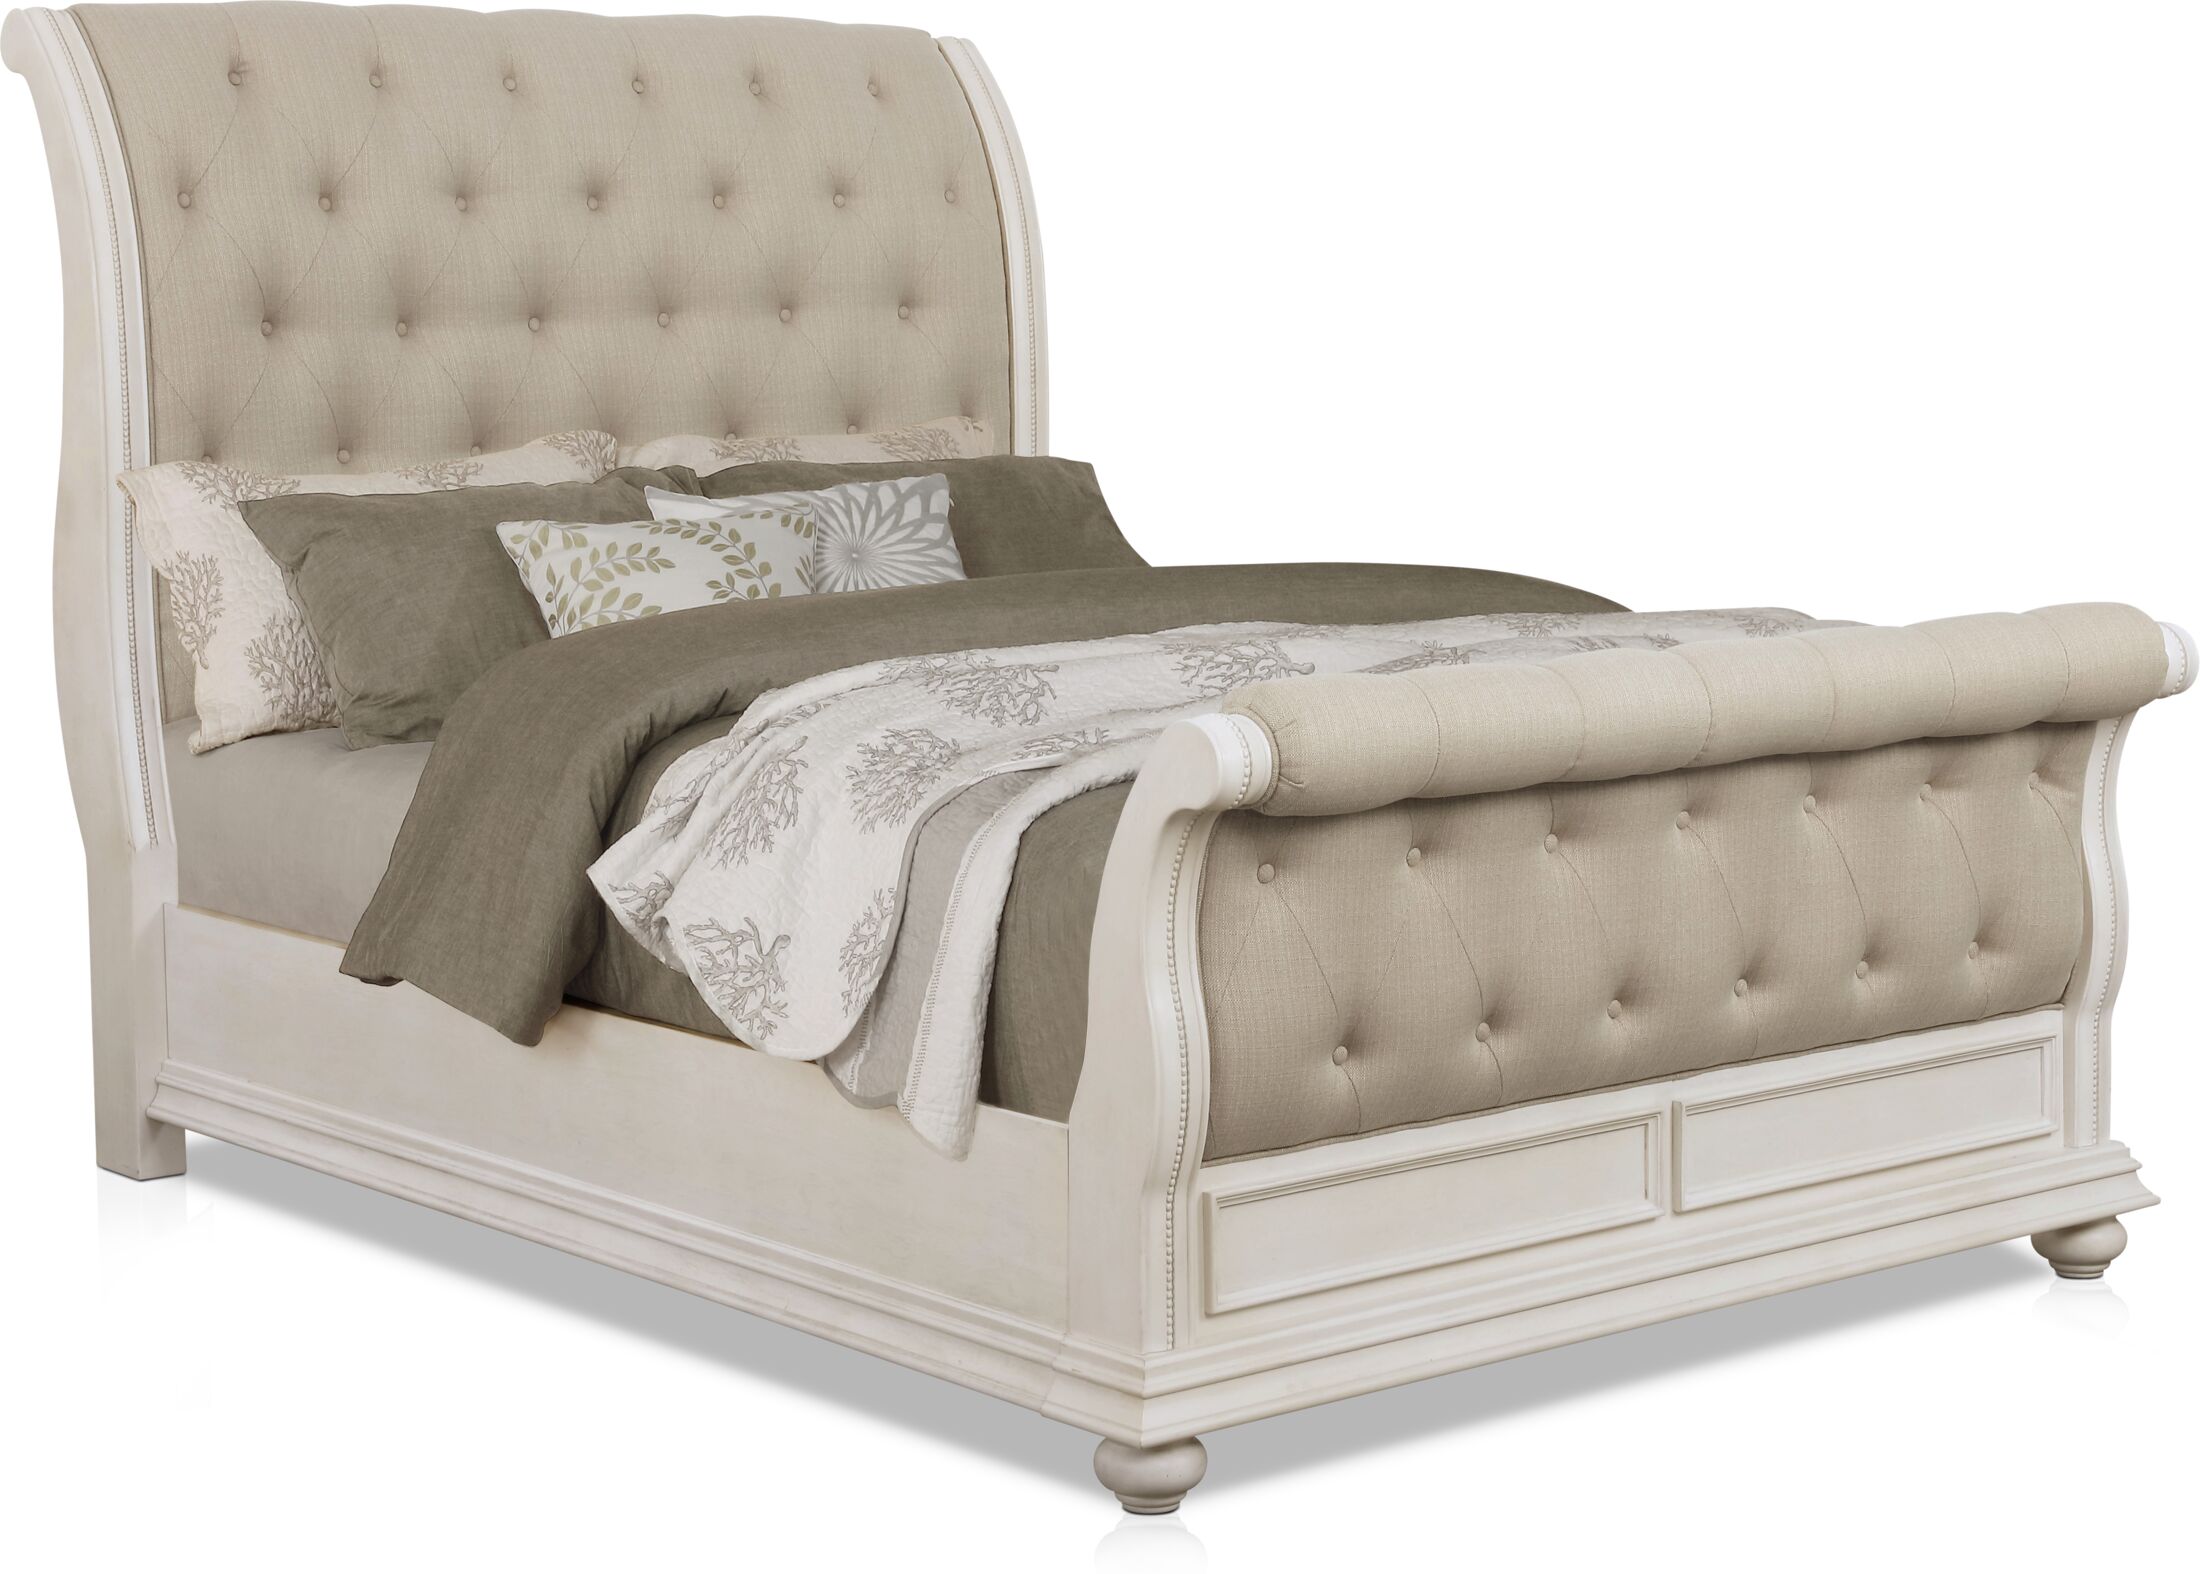 Undefined American Signature Furniture, White Upholstered King Bed